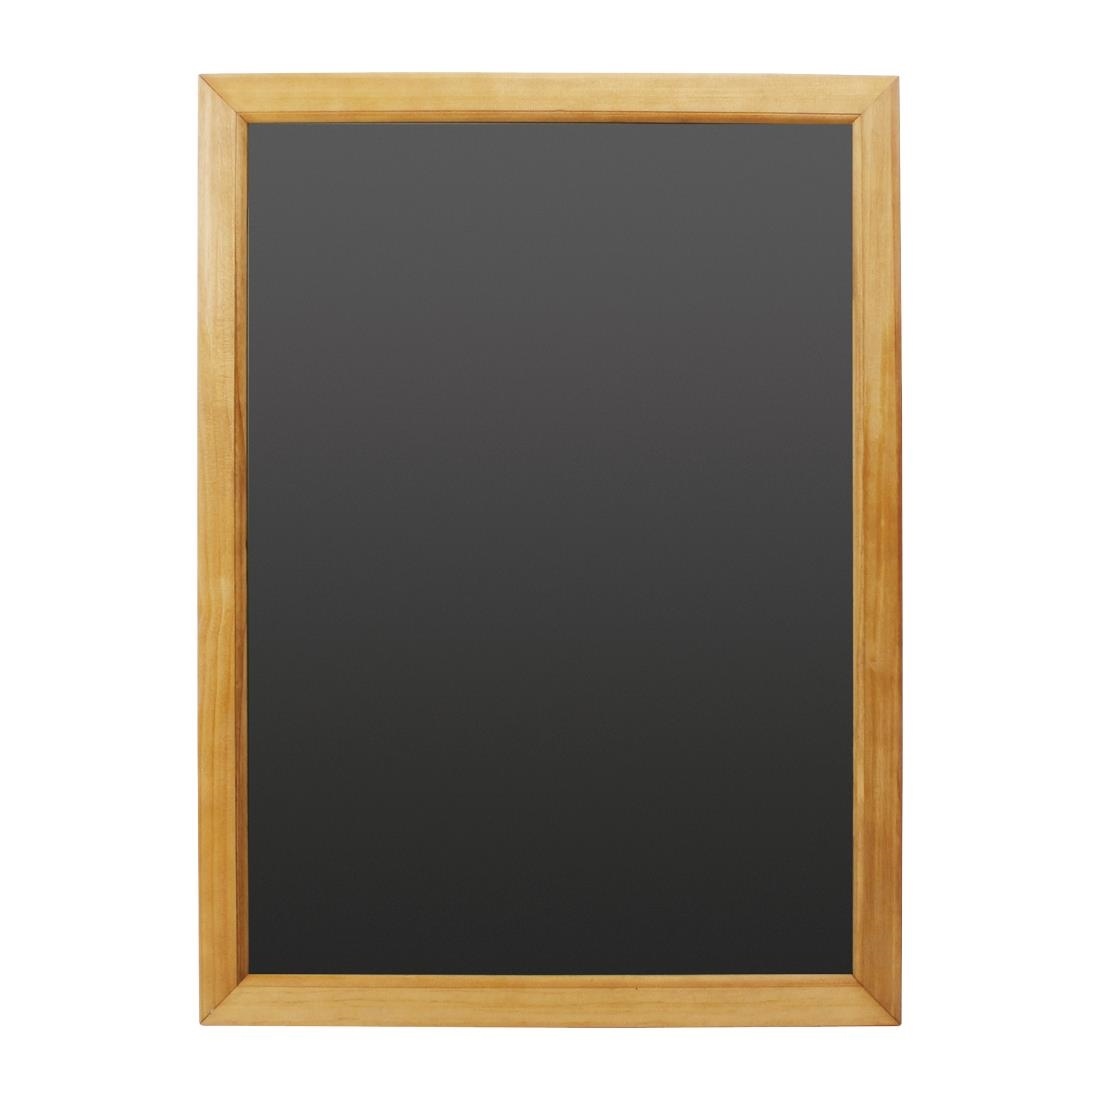 Chalk Board with Wooden Frame 60 x 40 cm Black Surface 